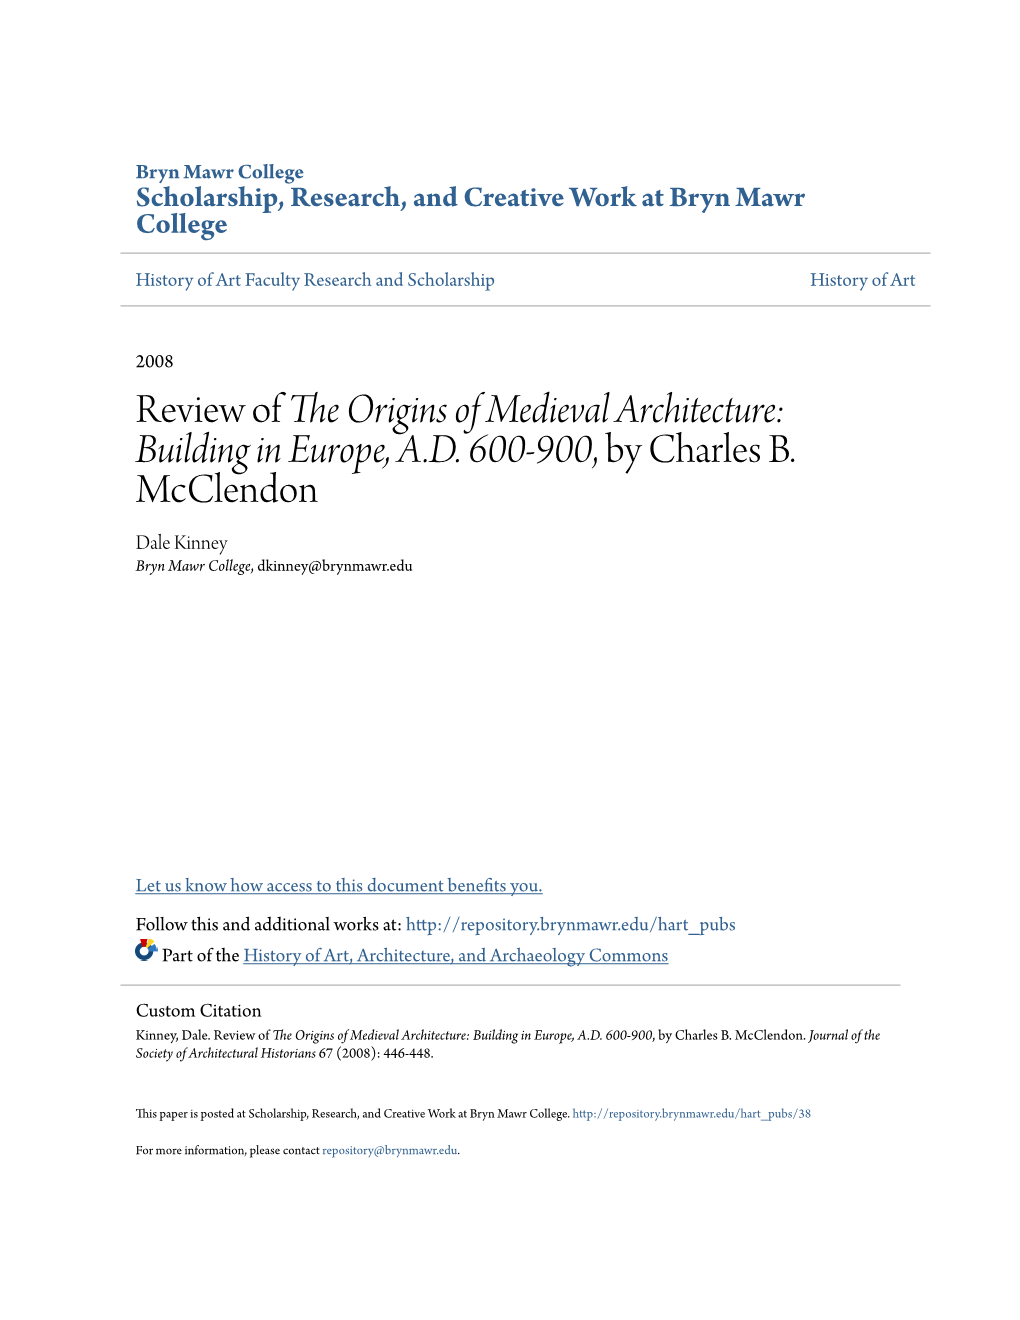 Review of the Origins of Medieval Architecture: Building in Europe, A.D